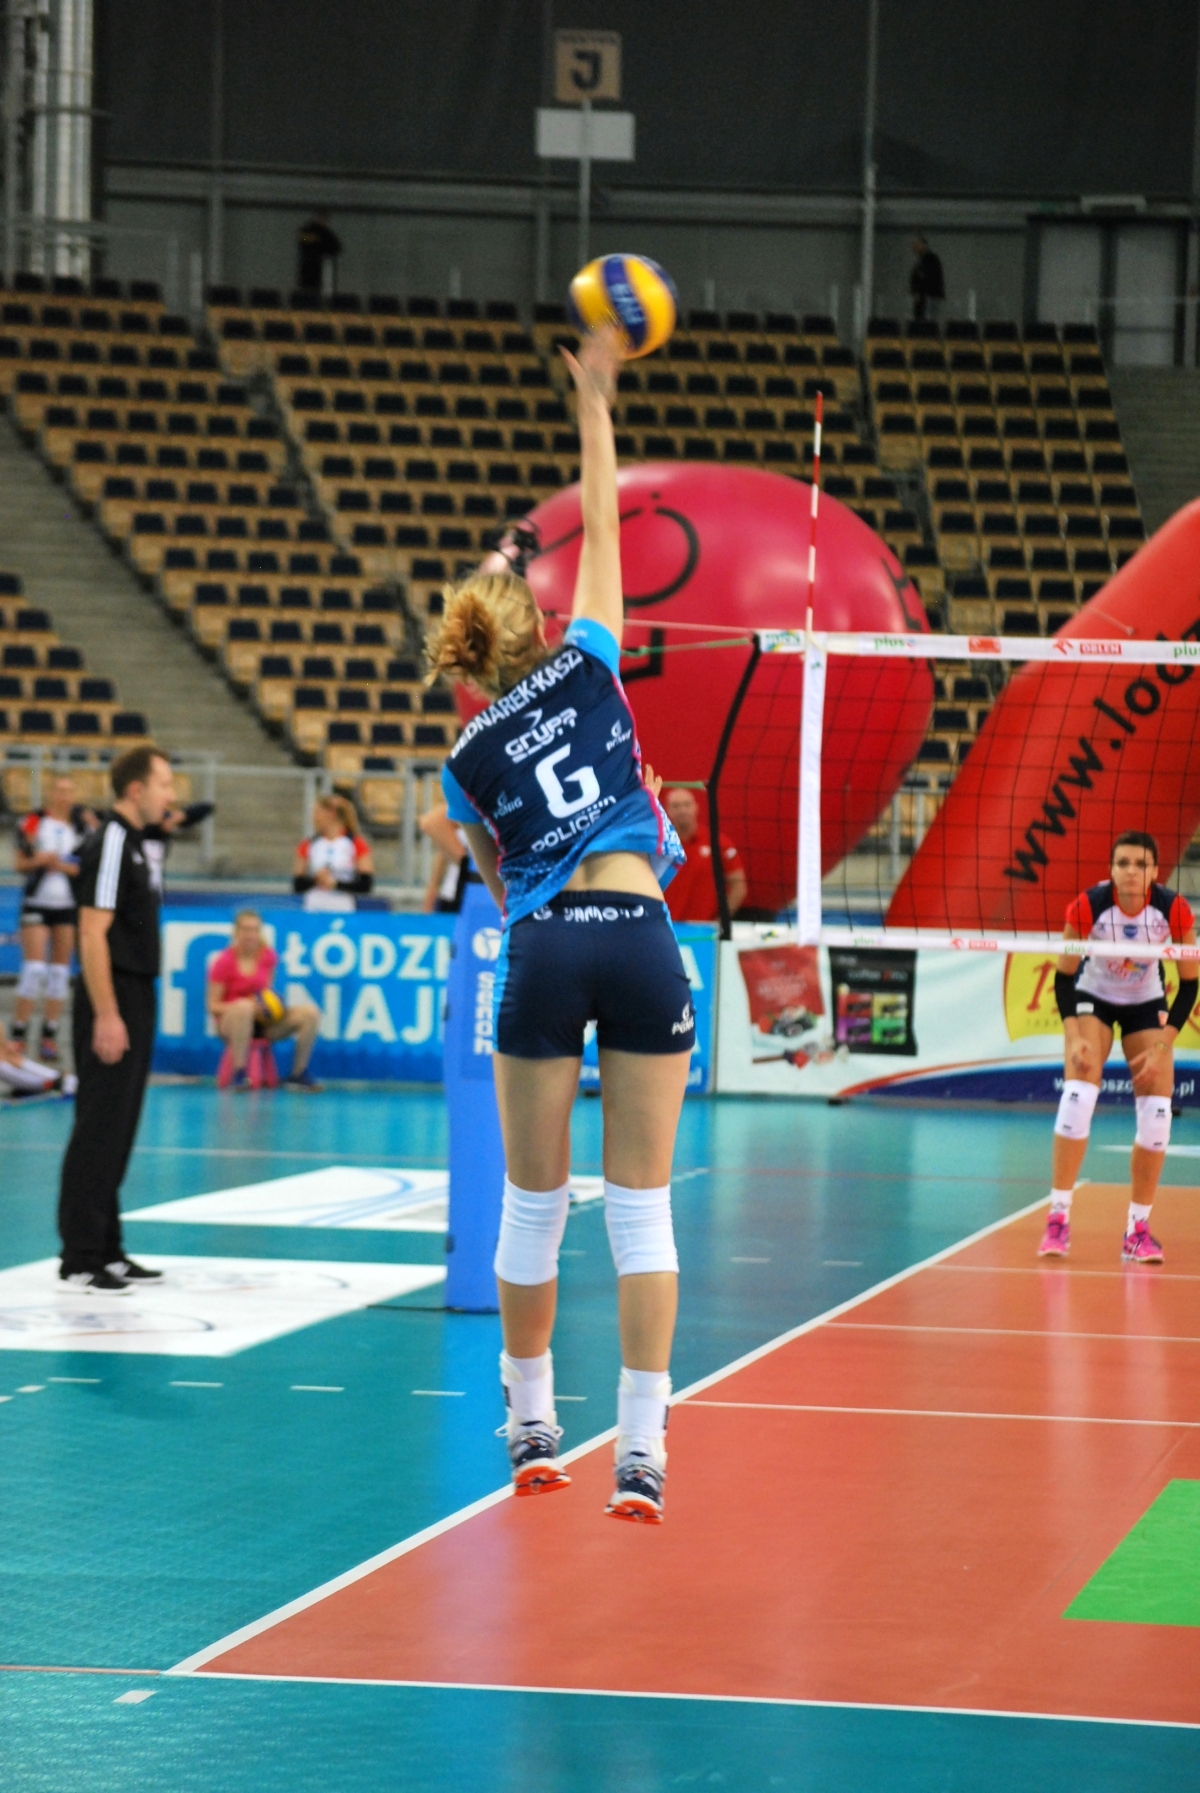 Serving from behind the service line allows players to generate enough power and height to clear the net and target specific areas of the opposing team's court.

Agnieszka jump float serve height (photo by zorro2212)